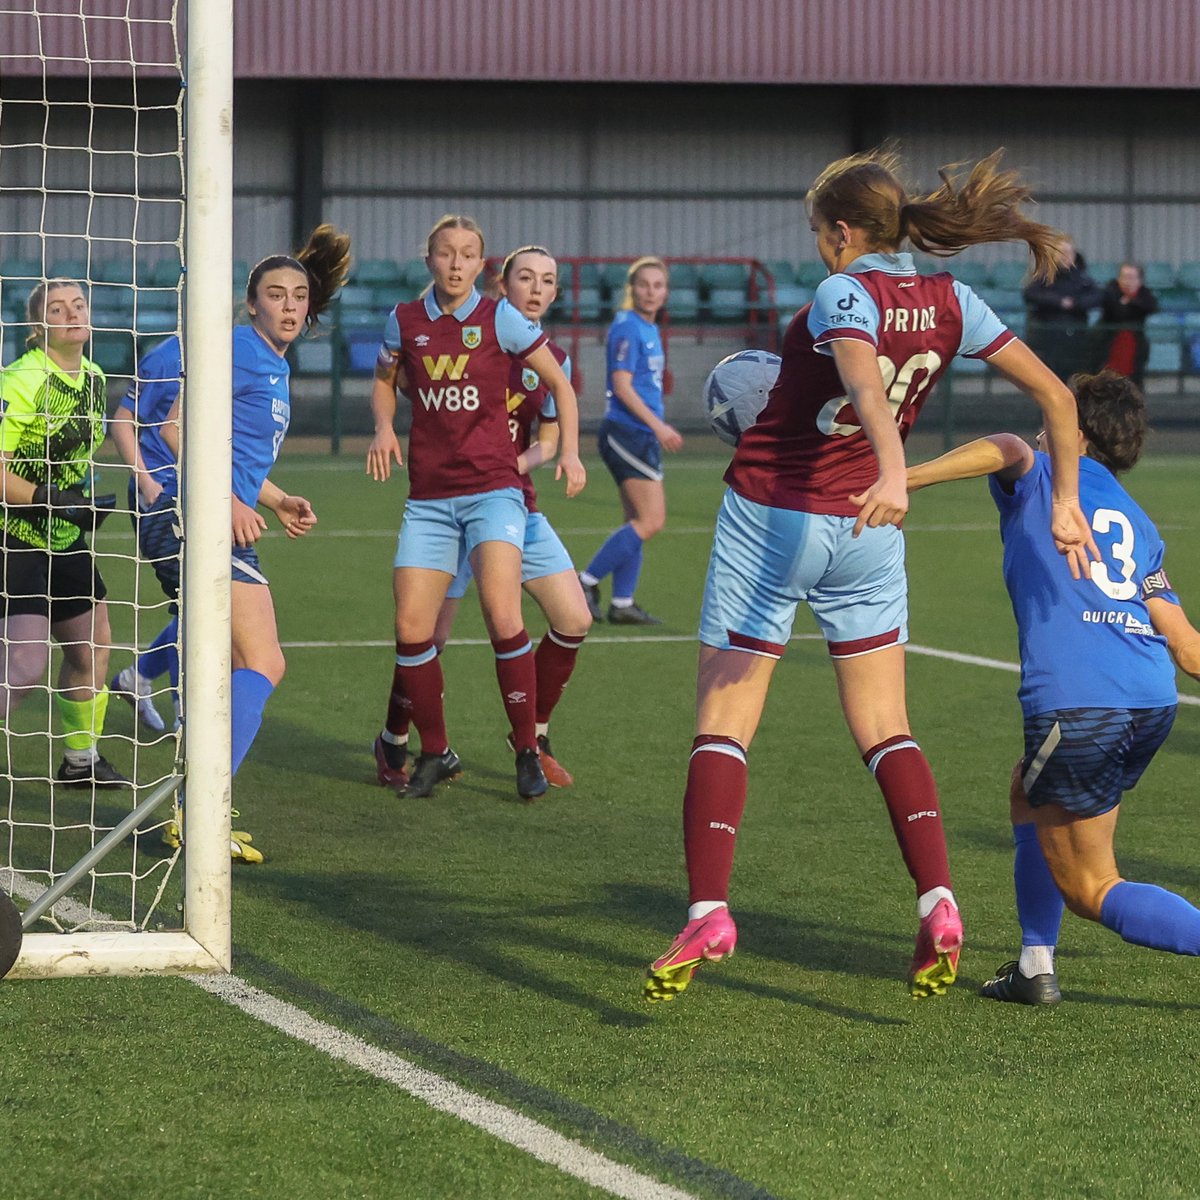 Sawiuk on Prior's first Burnley goal 🗣️ 'I'm over the moon for Gracie, she's an exceptional talent on the ball. To see her get a goal is deserved when looking at the overall season contribution! It was nice for her to have that moment with the team!' 💜